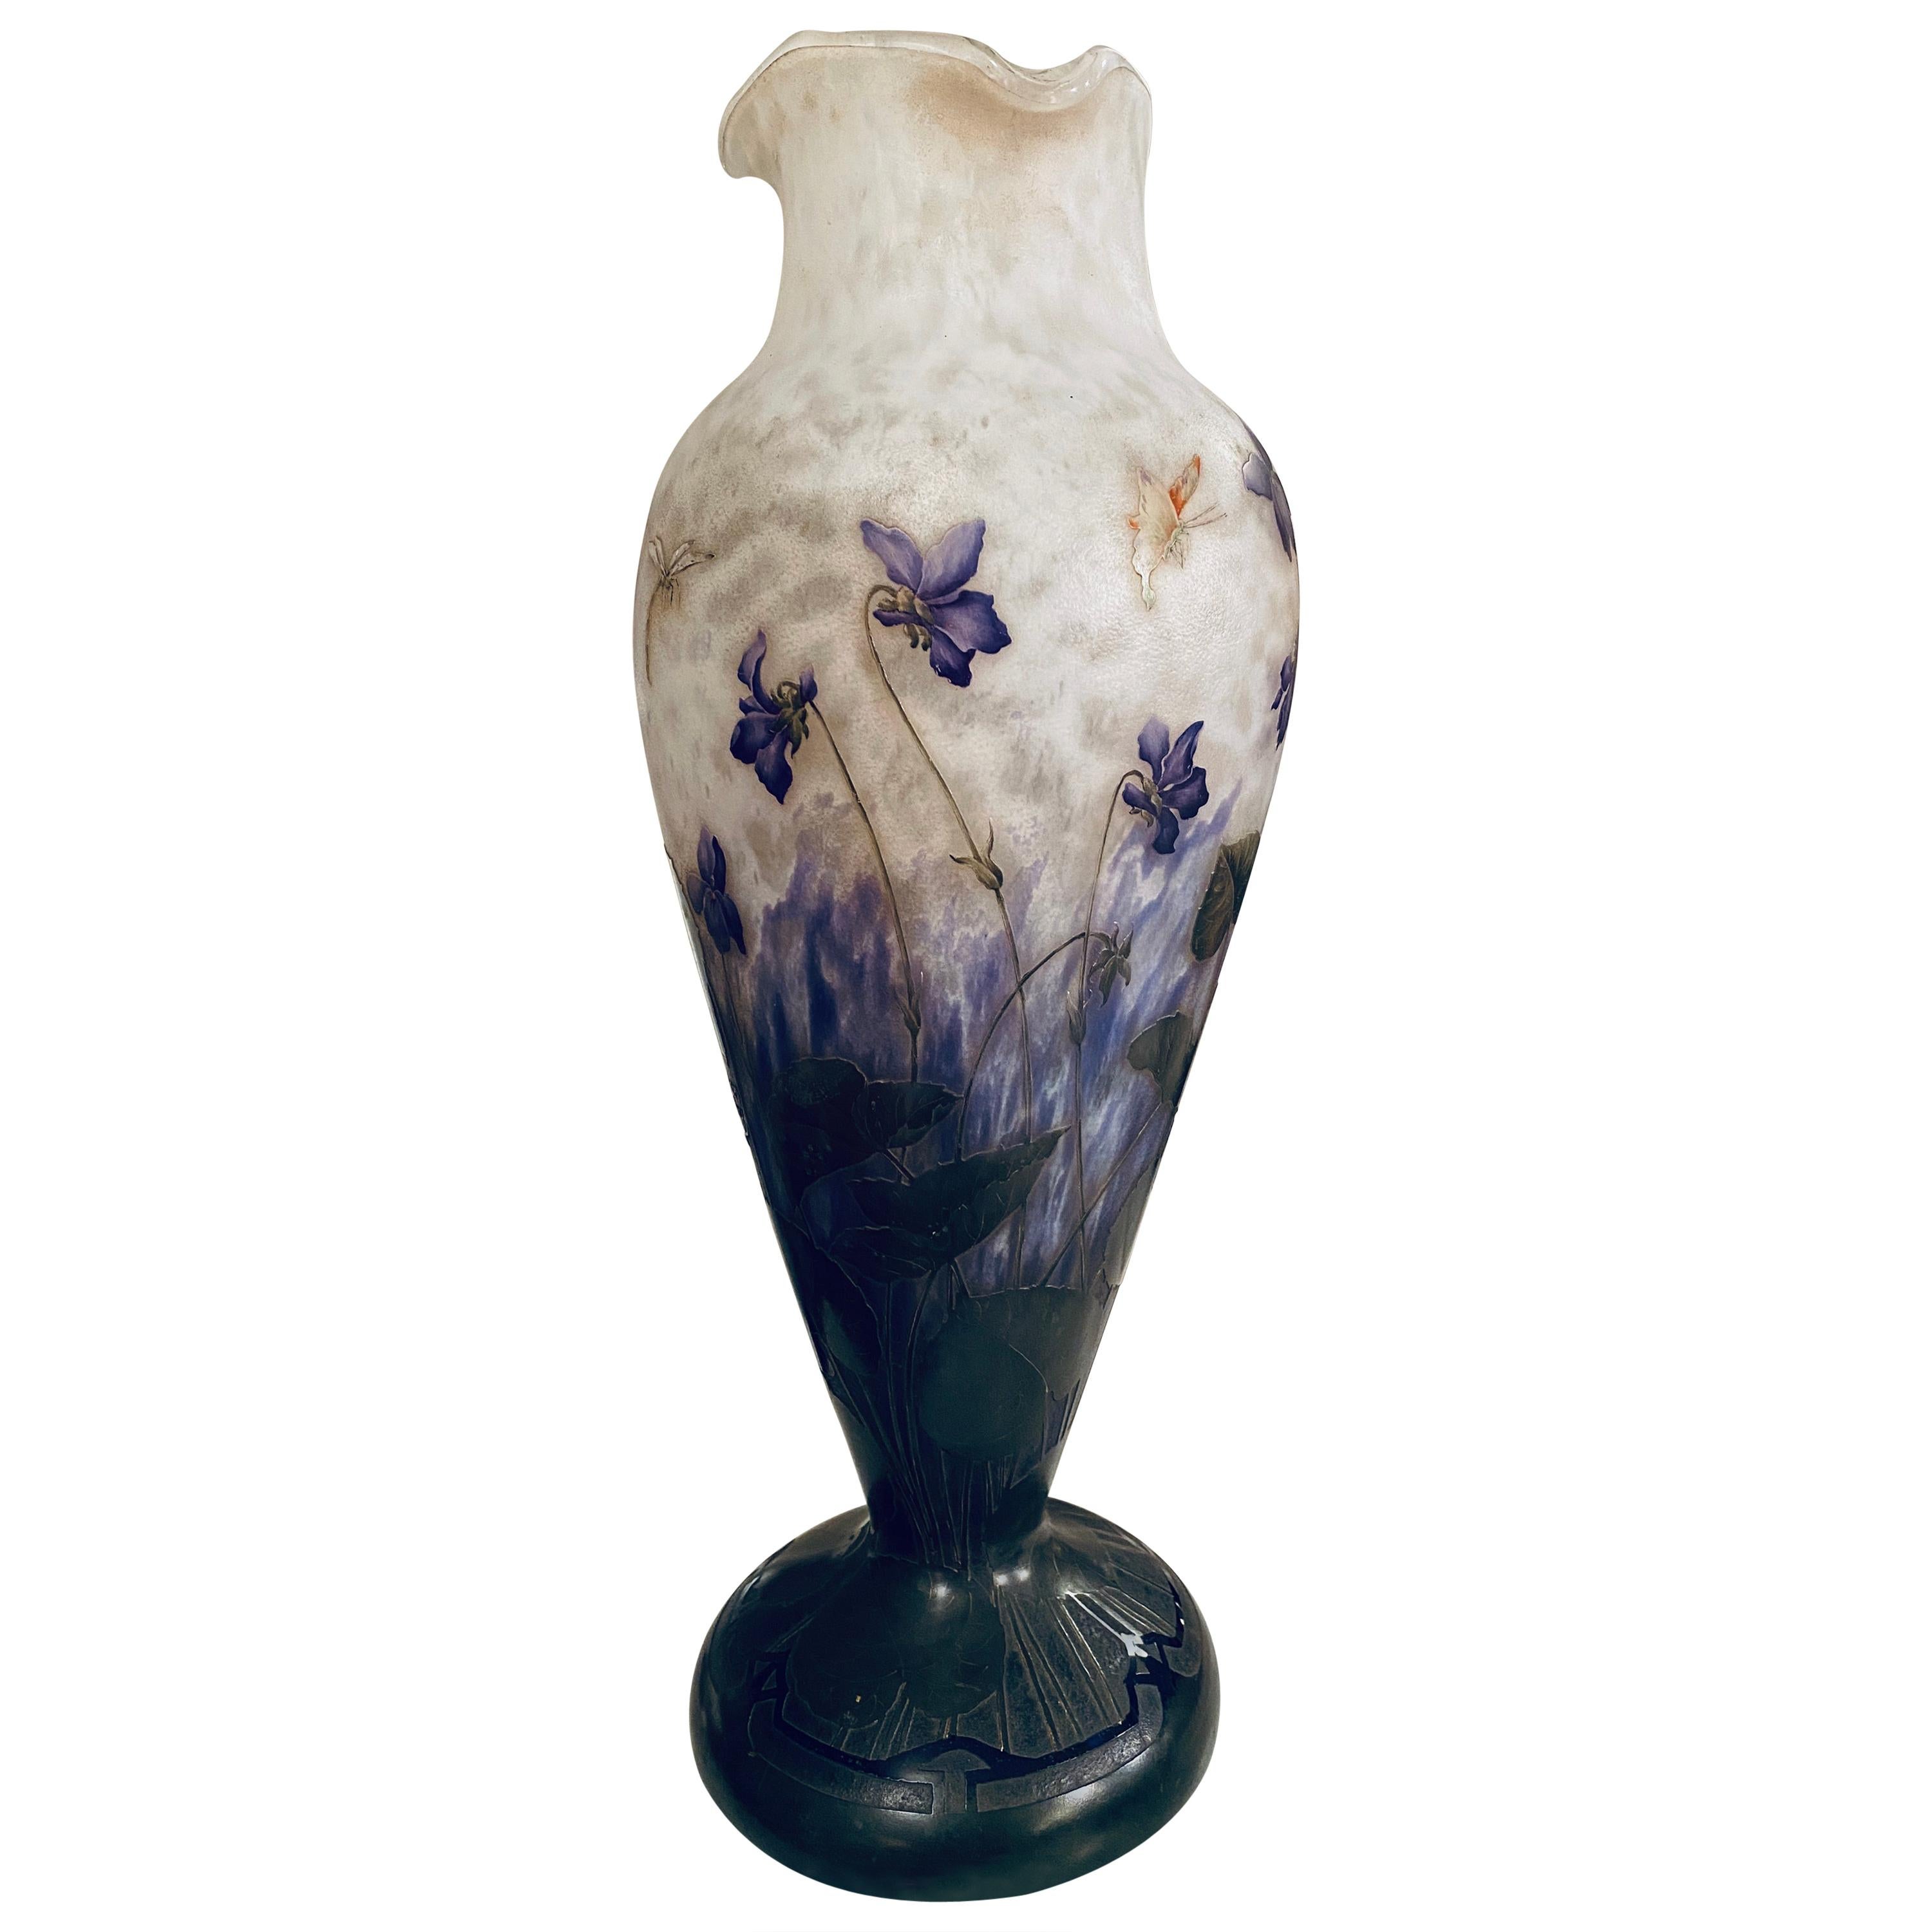 Important baluster vase with a lively collar in multilayered glass with a rotating decoration engraved on the wheel and acid with polychrome enamels of violets, butterfly and dragonfly on a white marmoreal base. Measure: Height 49 cm.
Signature